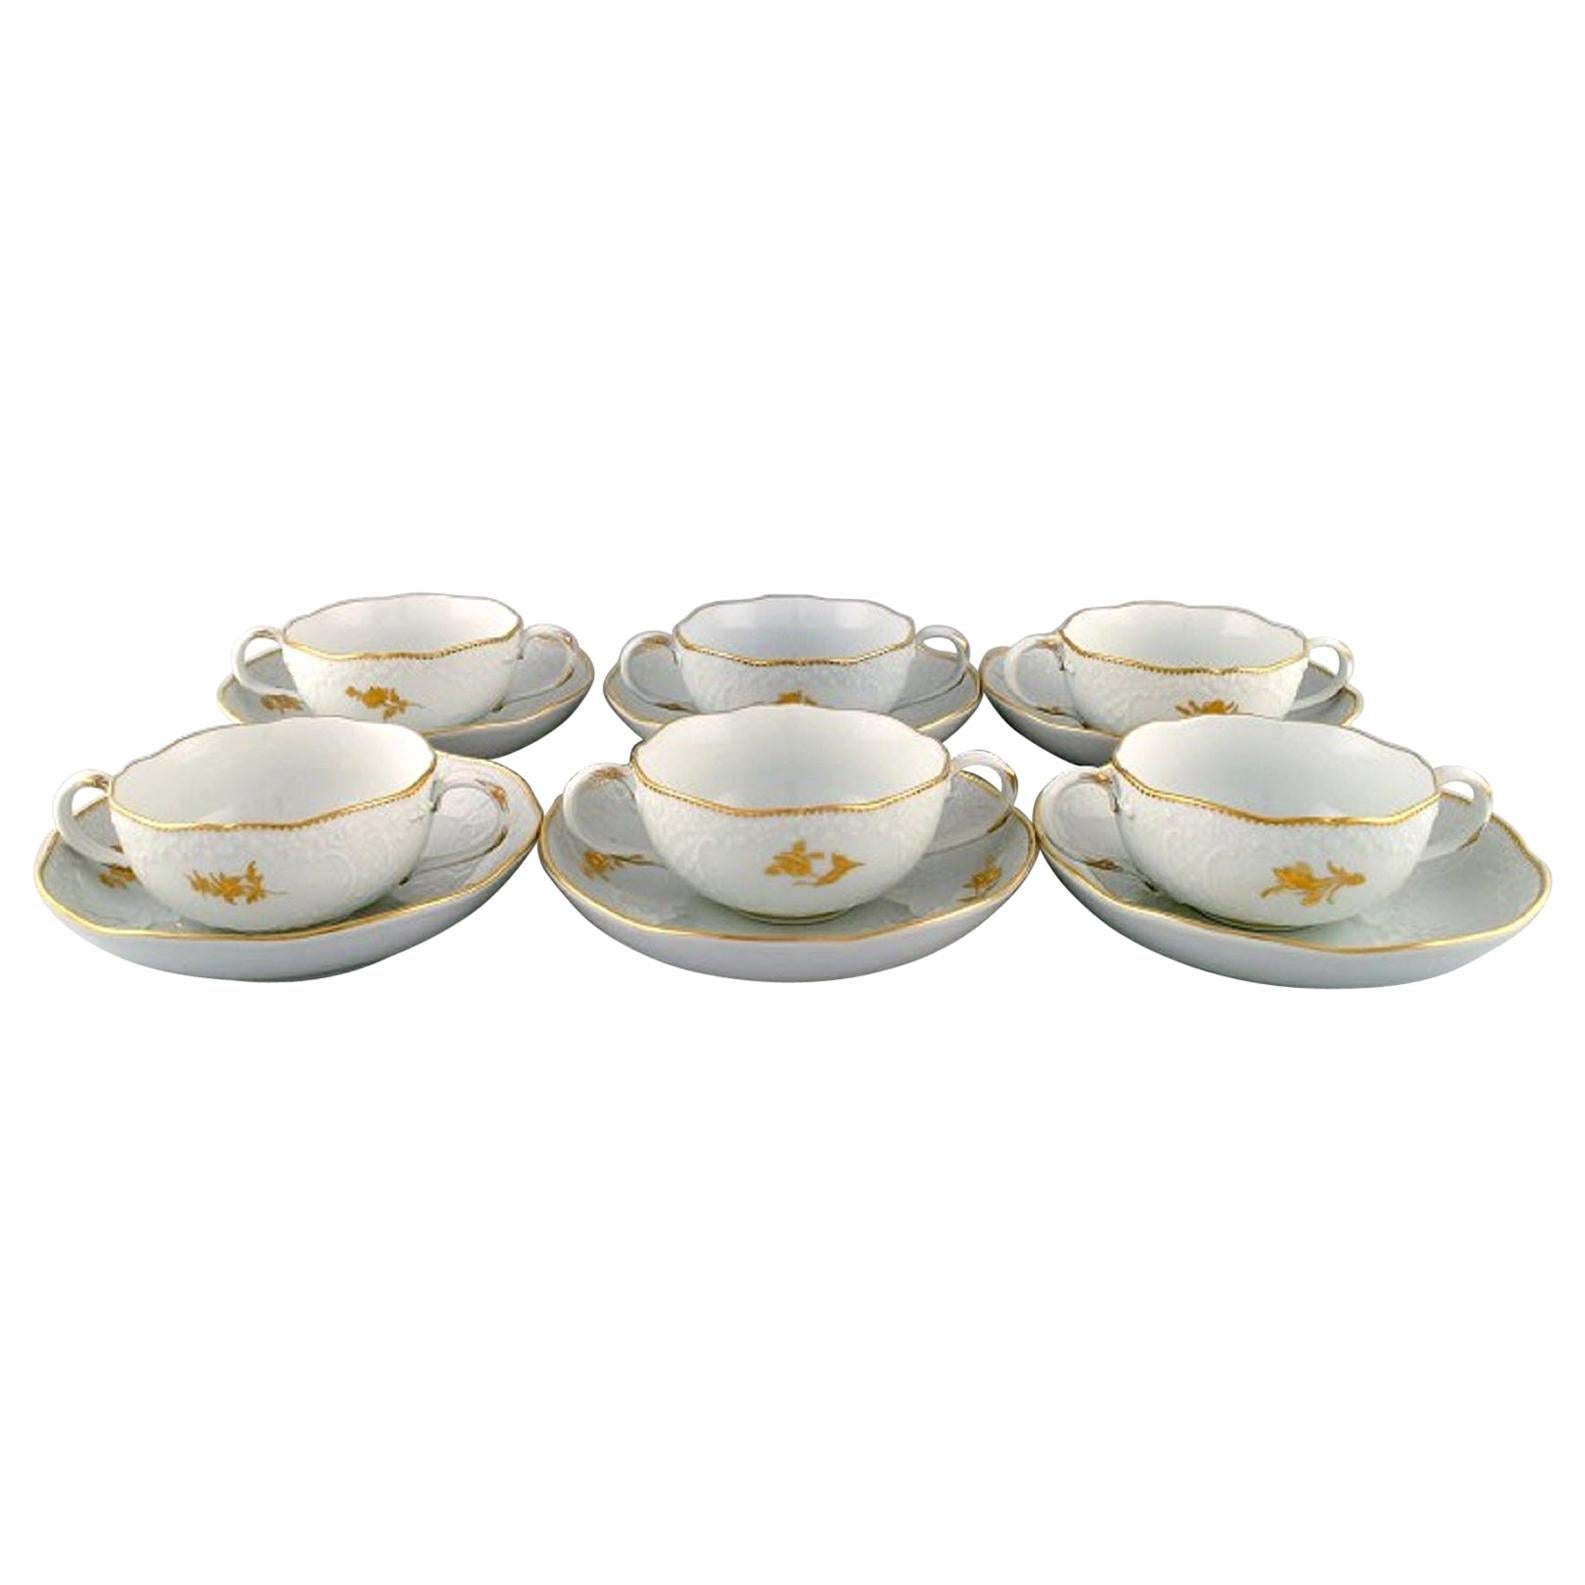 Six Meissen Bouillon Cups with Saucers in Porcelain with Flowers and Foliage